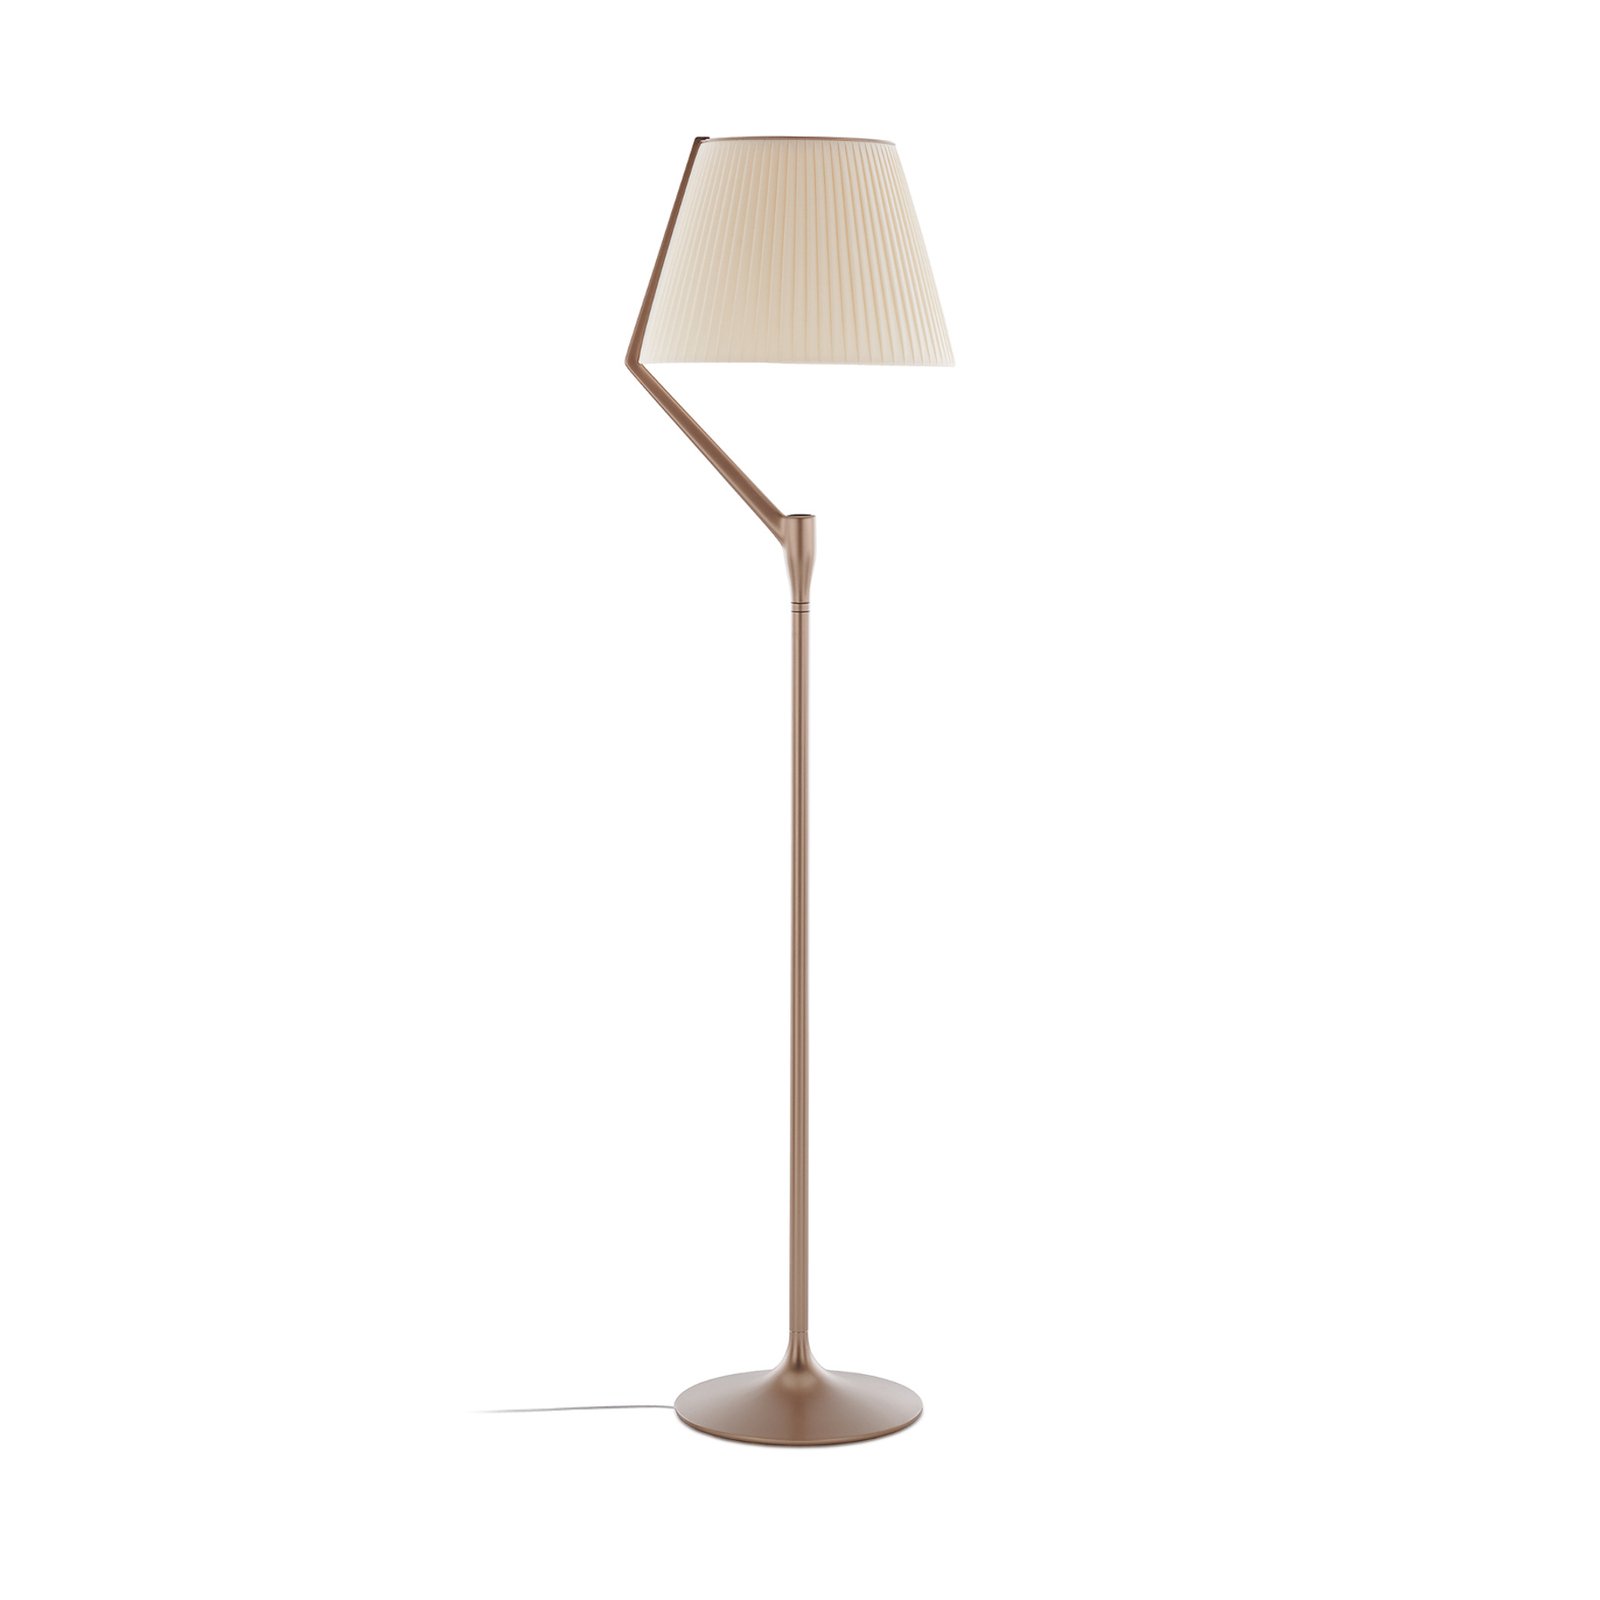 Kartell Angelo Stone lampe sur pied LED, cuivre